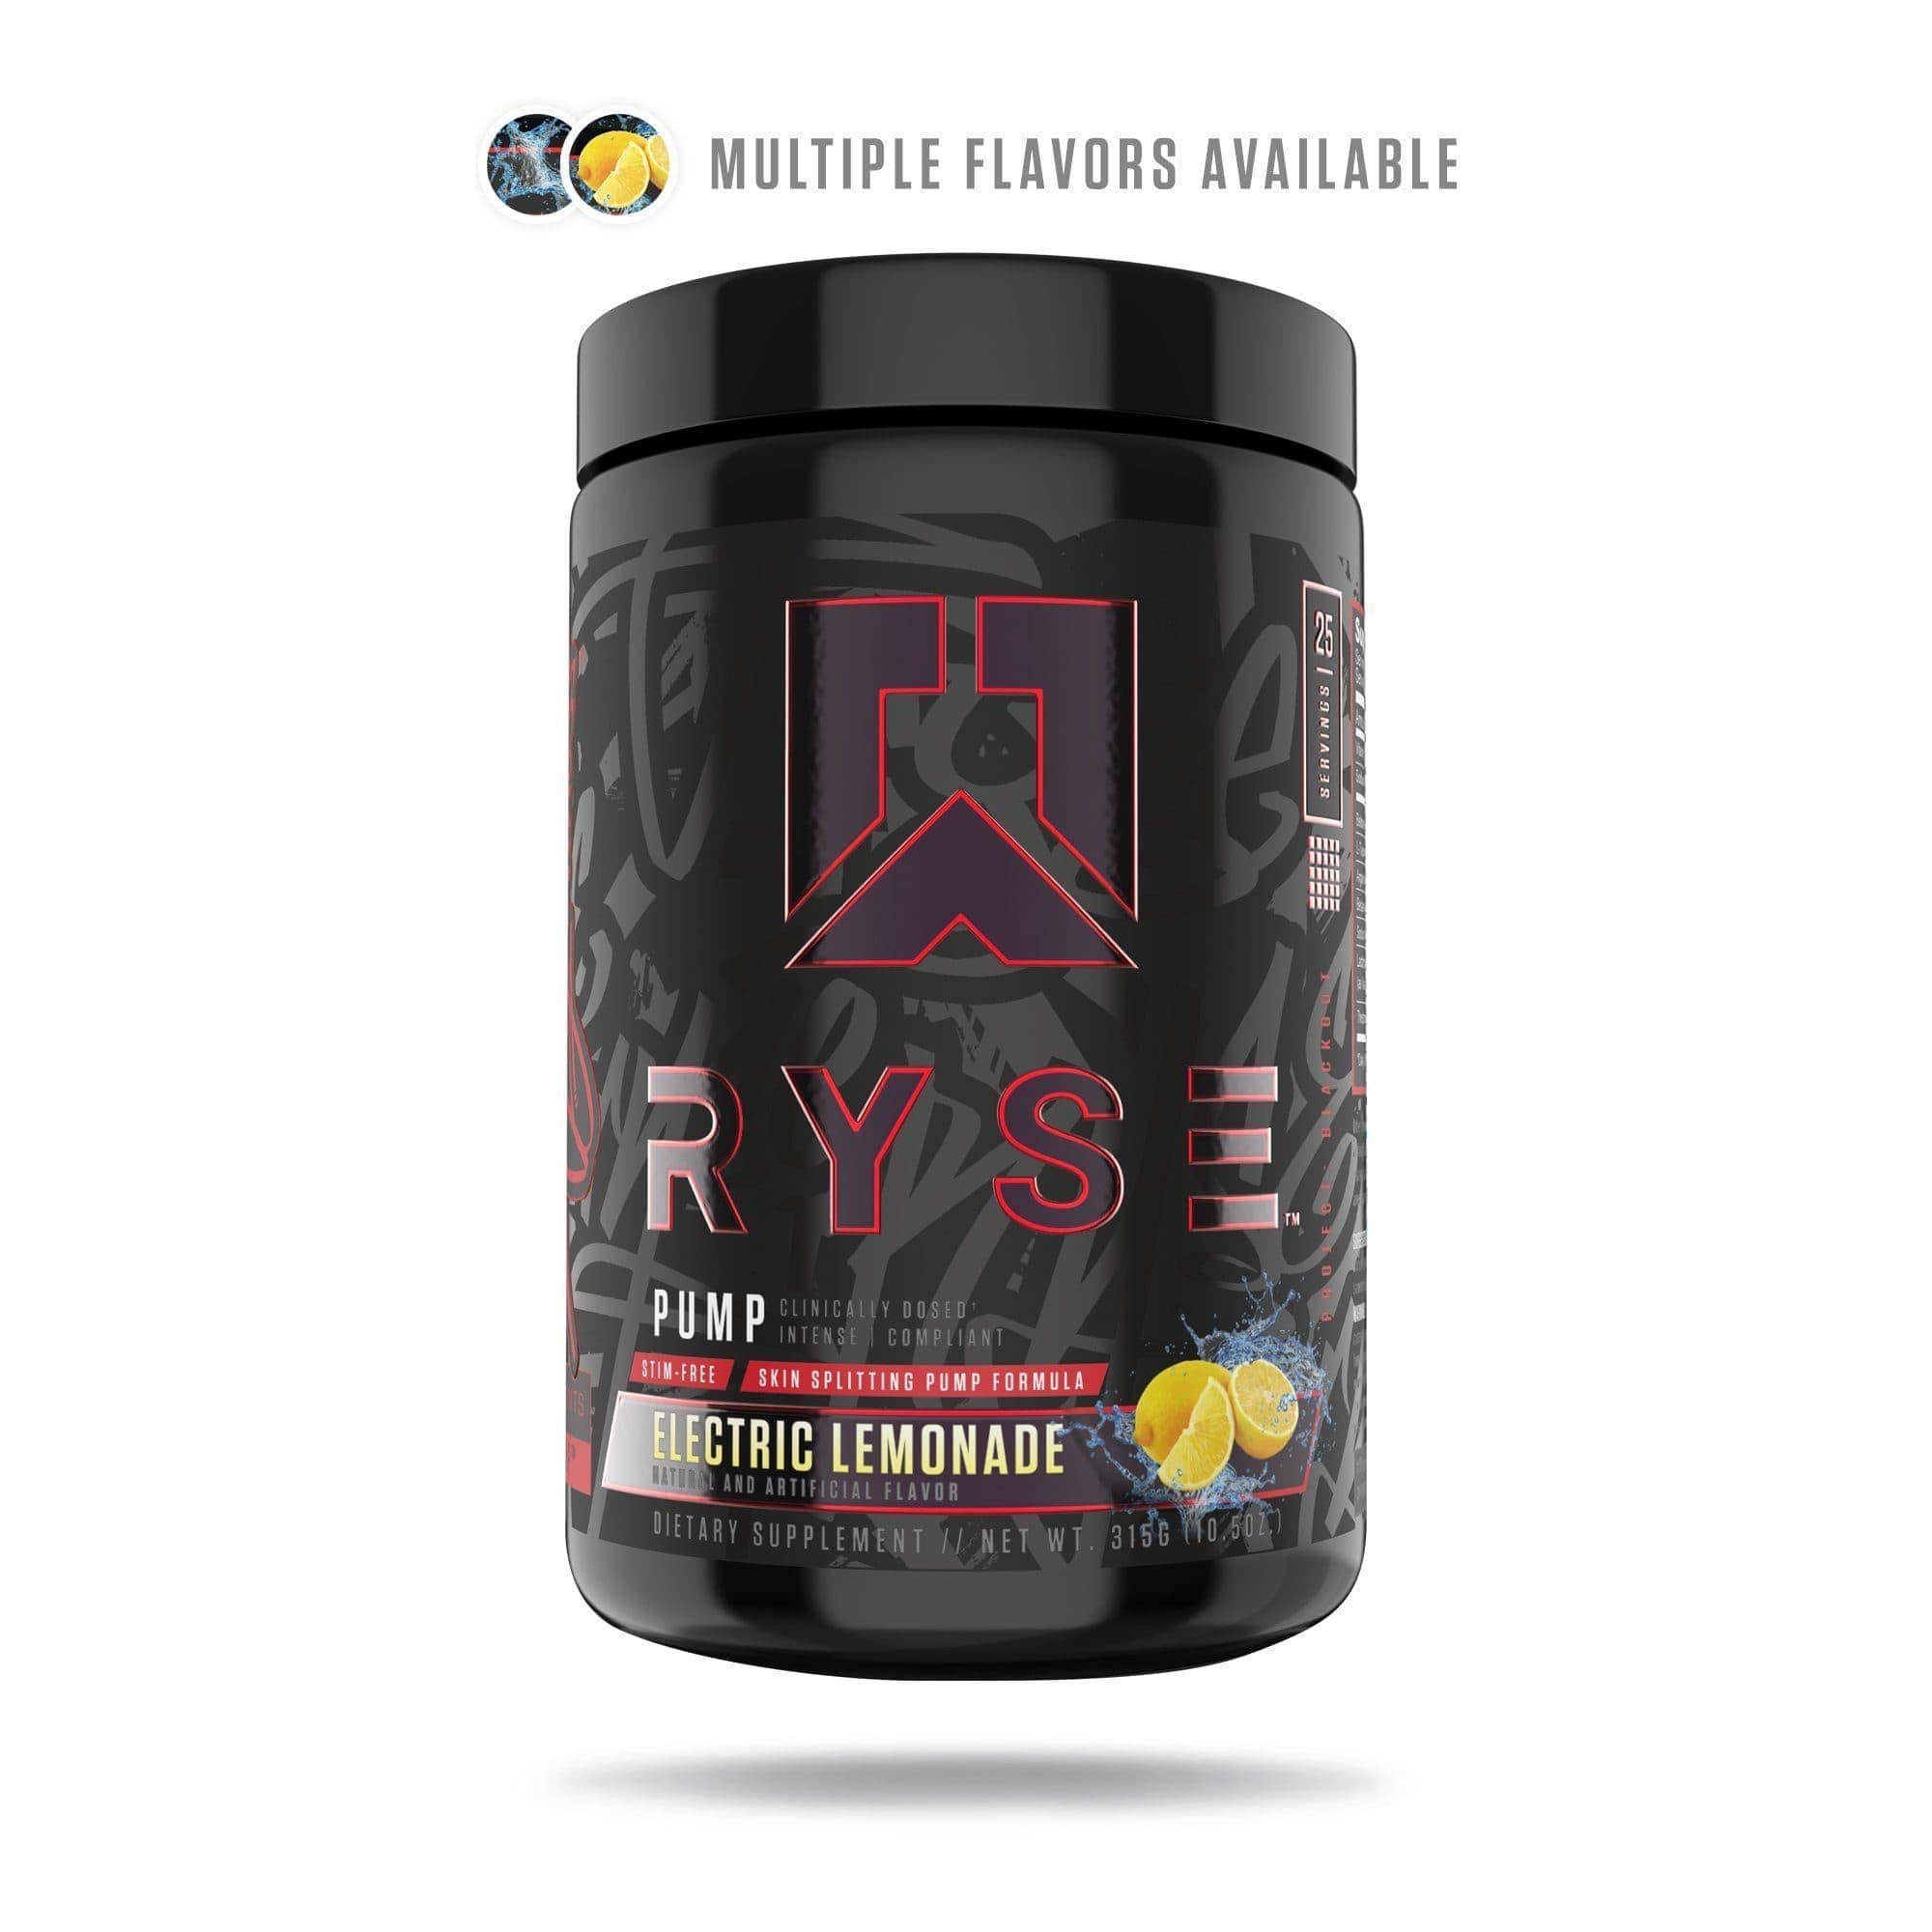 RYSEPump Powder - Project BlackoutMuscle Pump FormulaRED SUPPS